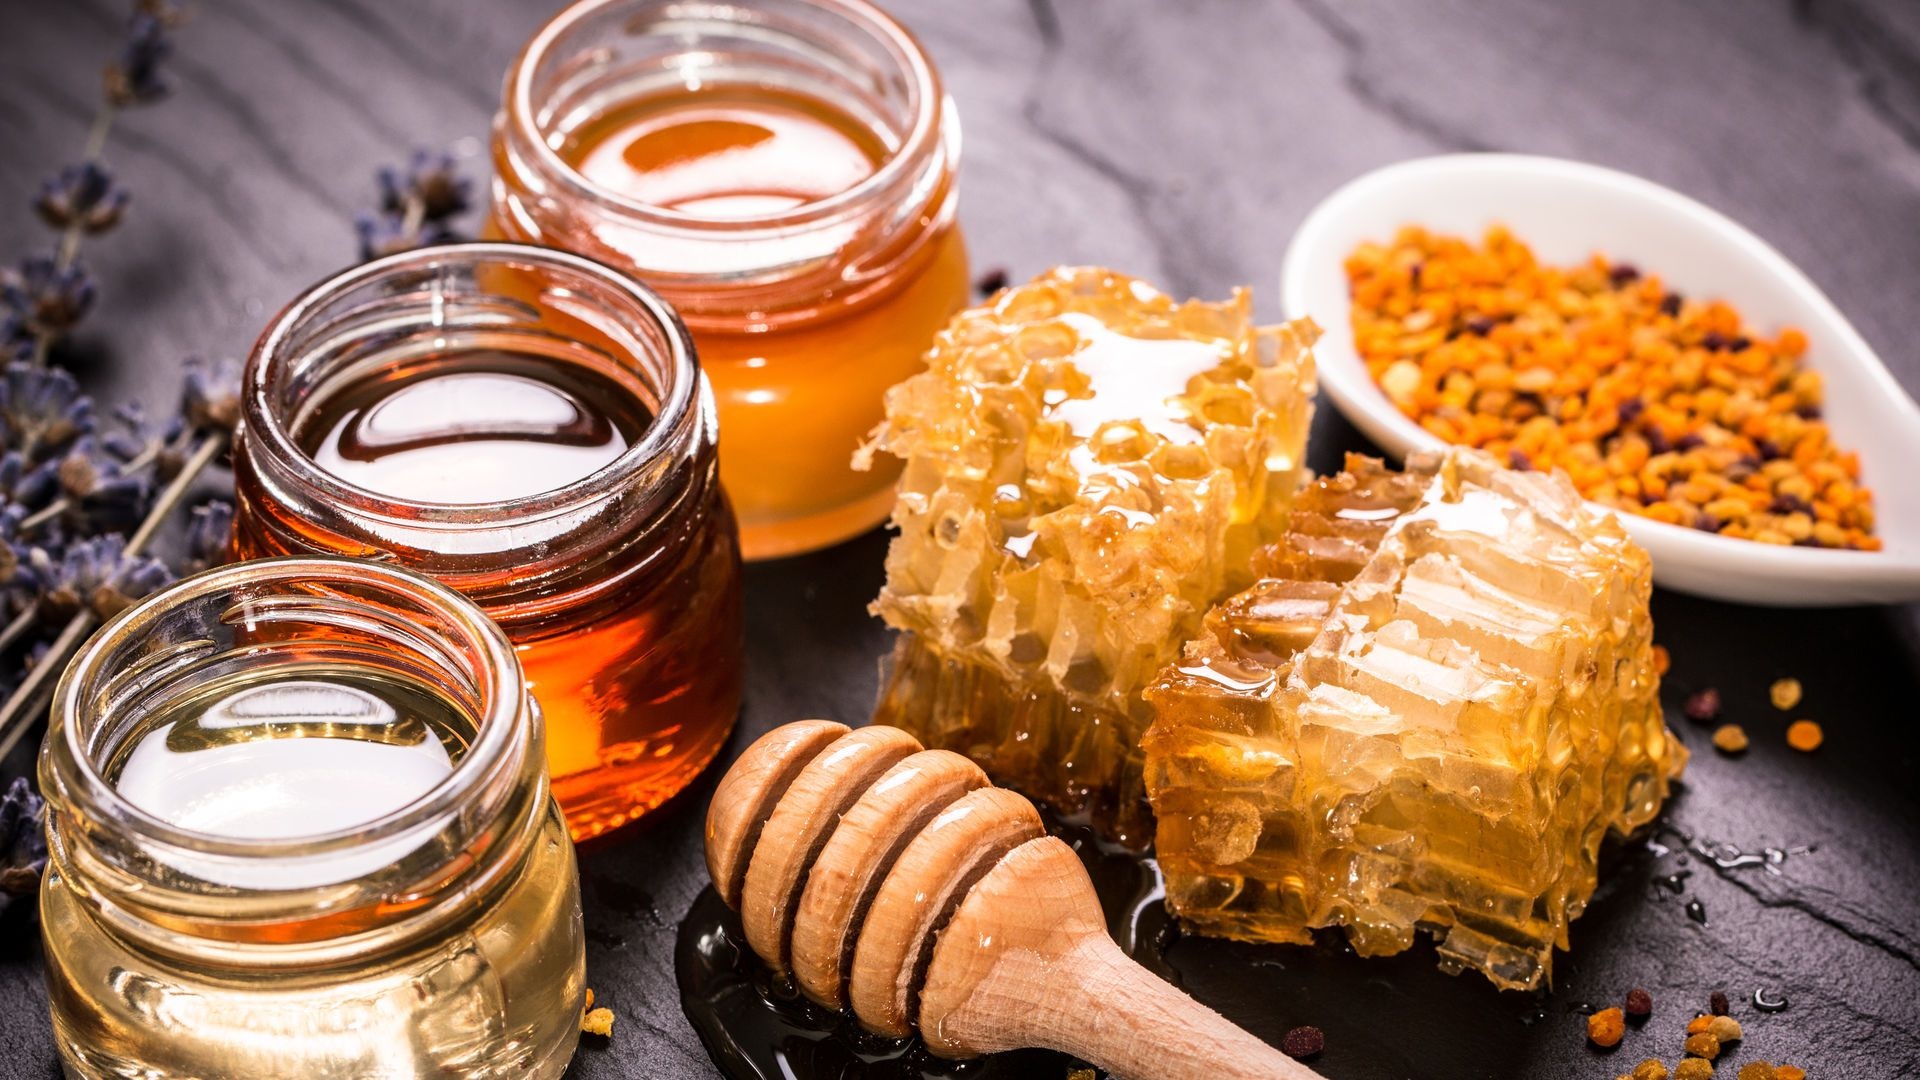 Honey: Made by bees from the nectar they collect from flowers. 1920x1080 Full HD Wallpaper.